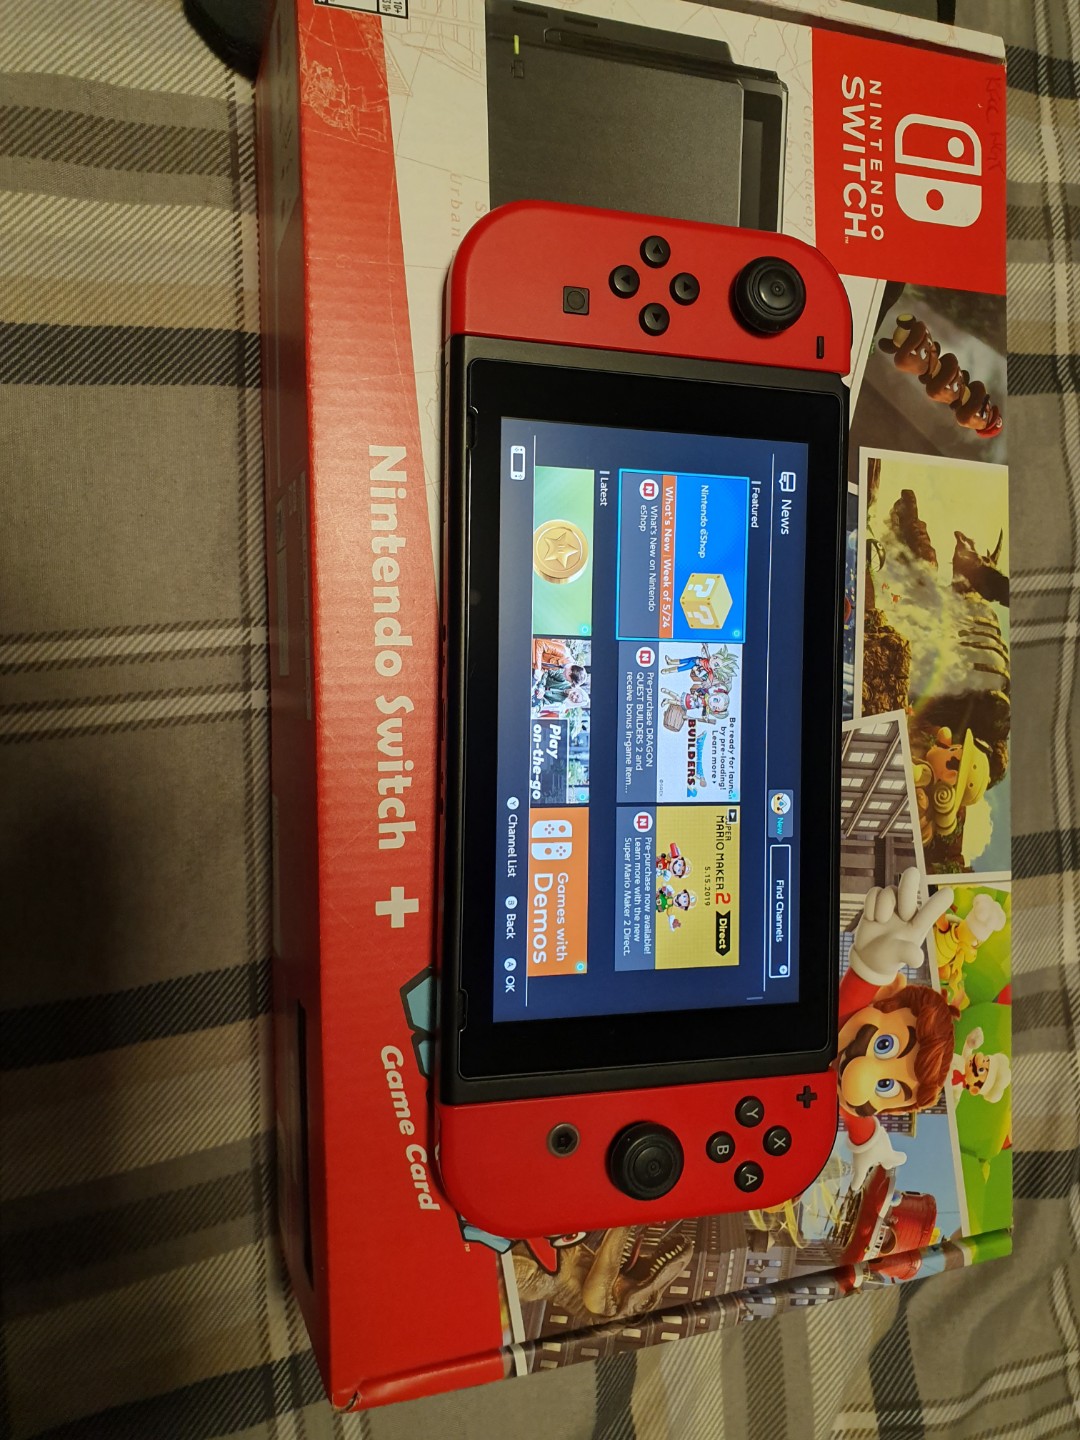 nintendo switch console only for sale